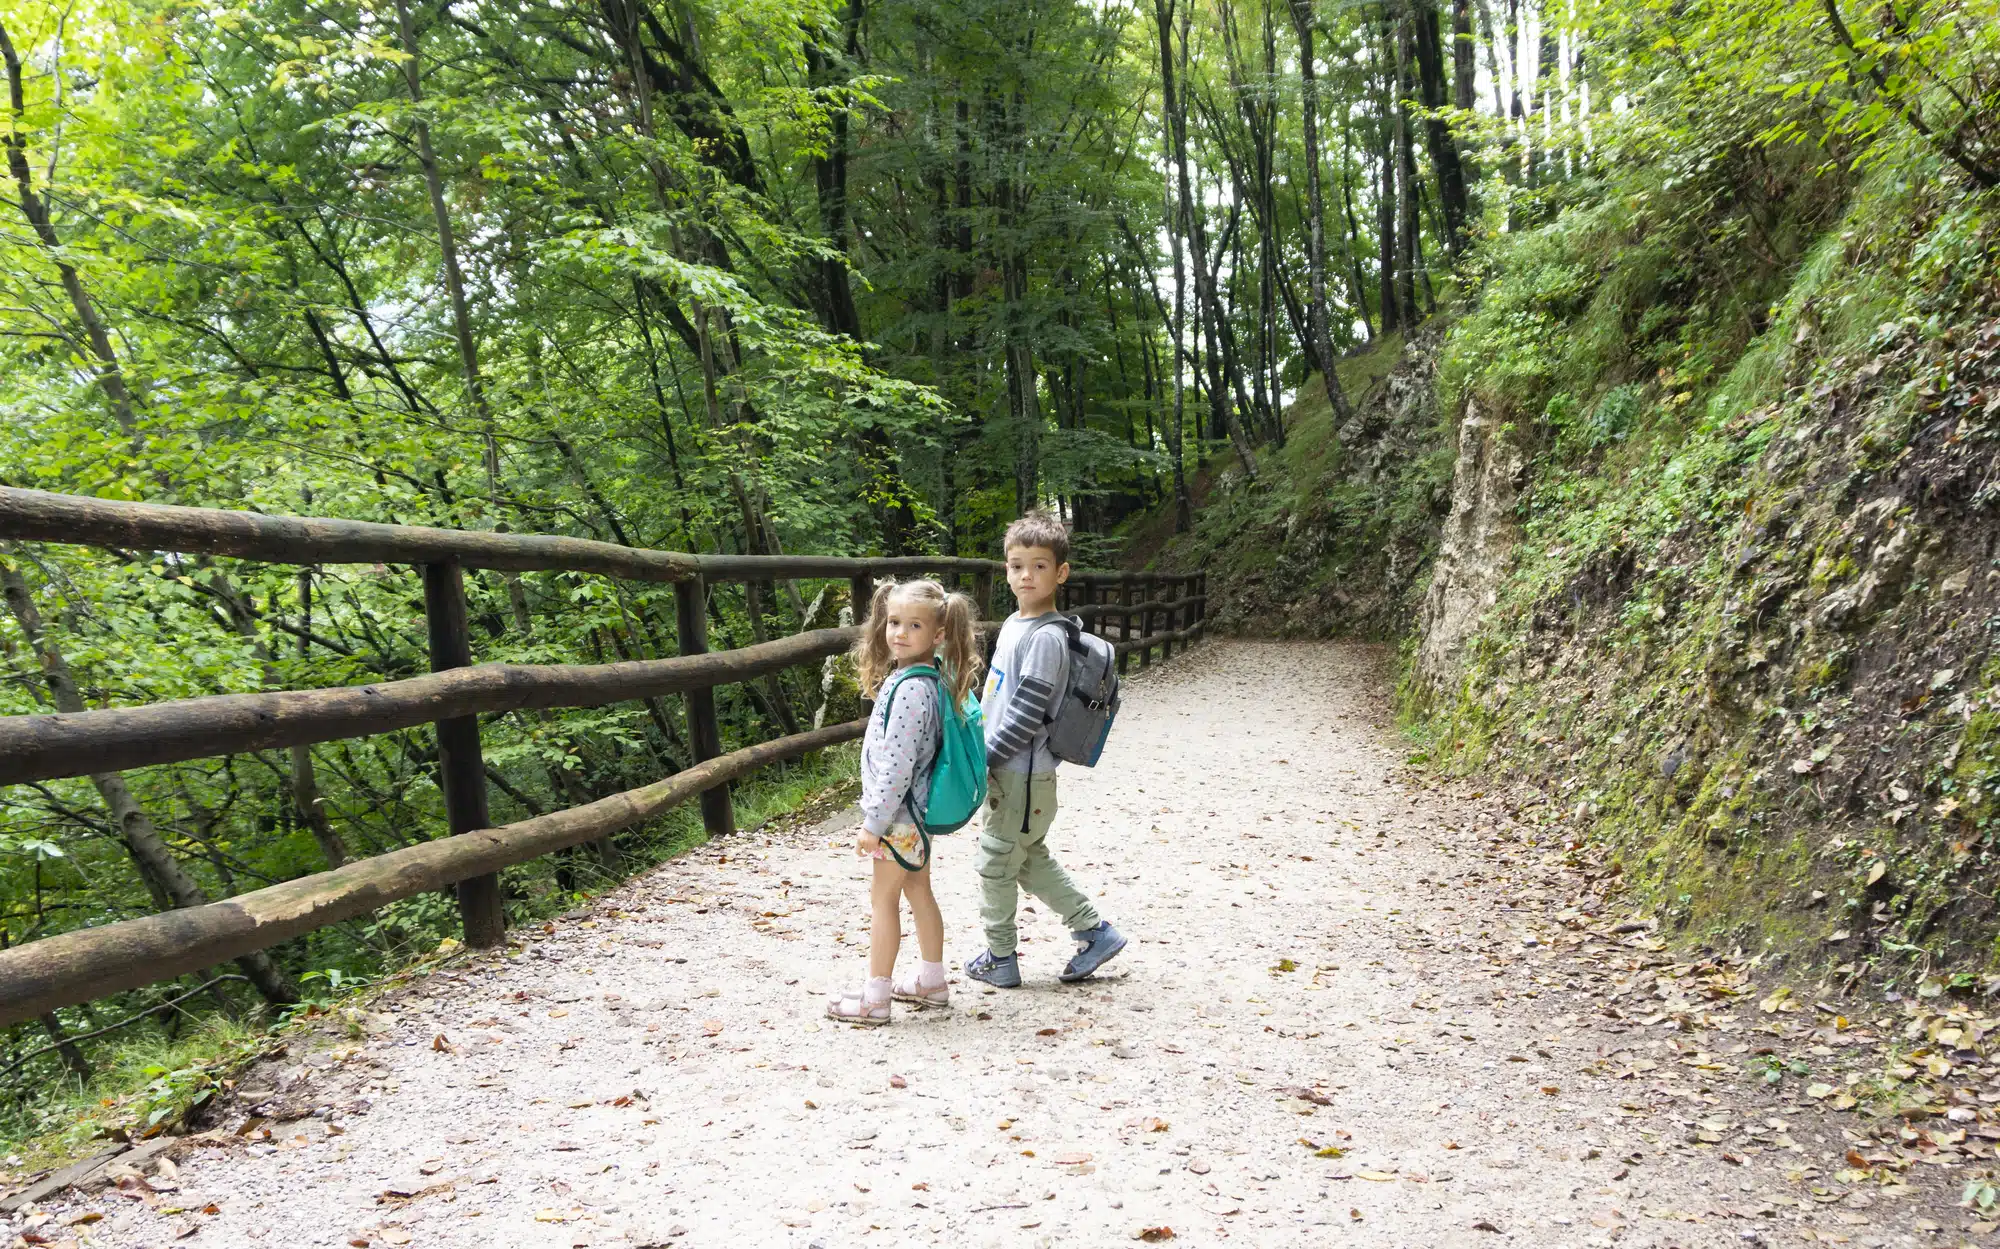 7 Great Ways to Make Walks Engaging and Educational